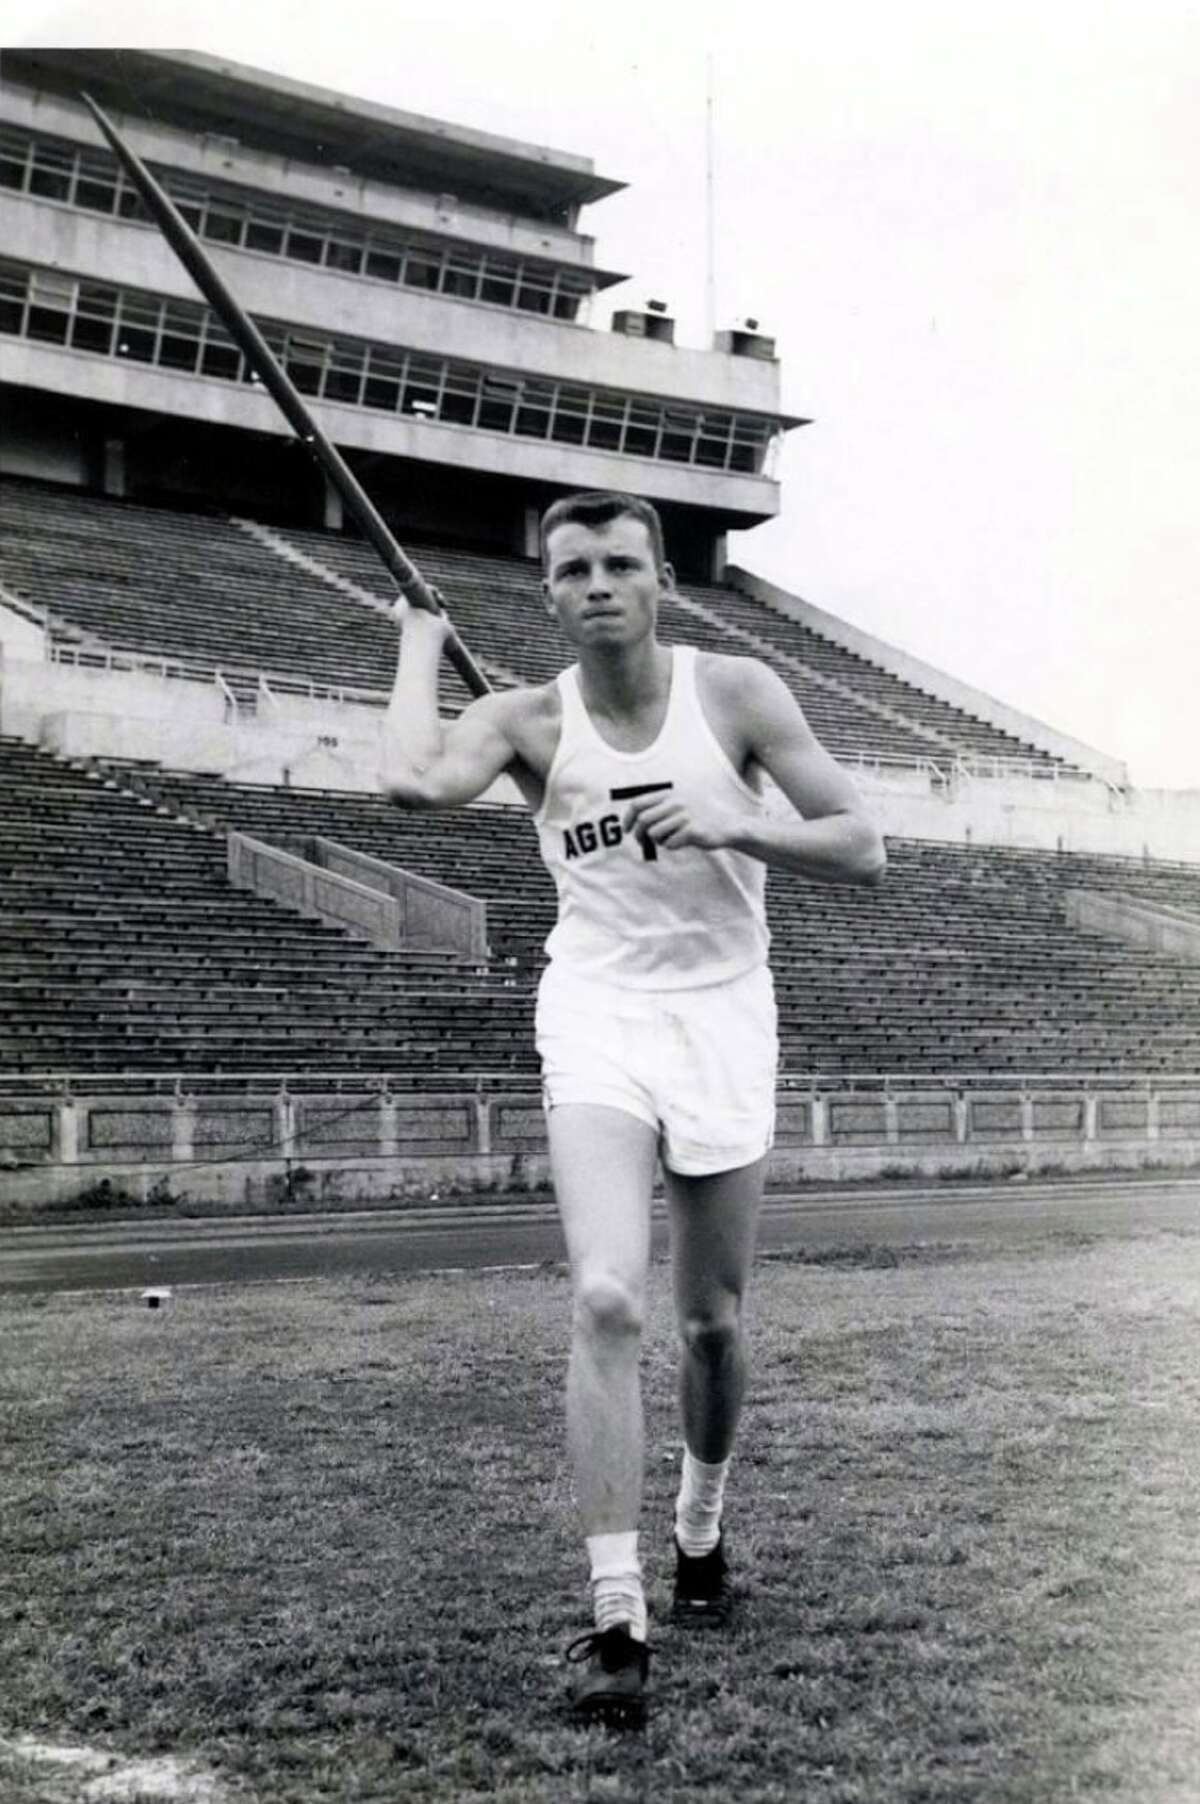 Newt Lamb, who graduated from Texas A&M in 1960, threw the javelin for the Aggies. Courtesy: Lamb Family